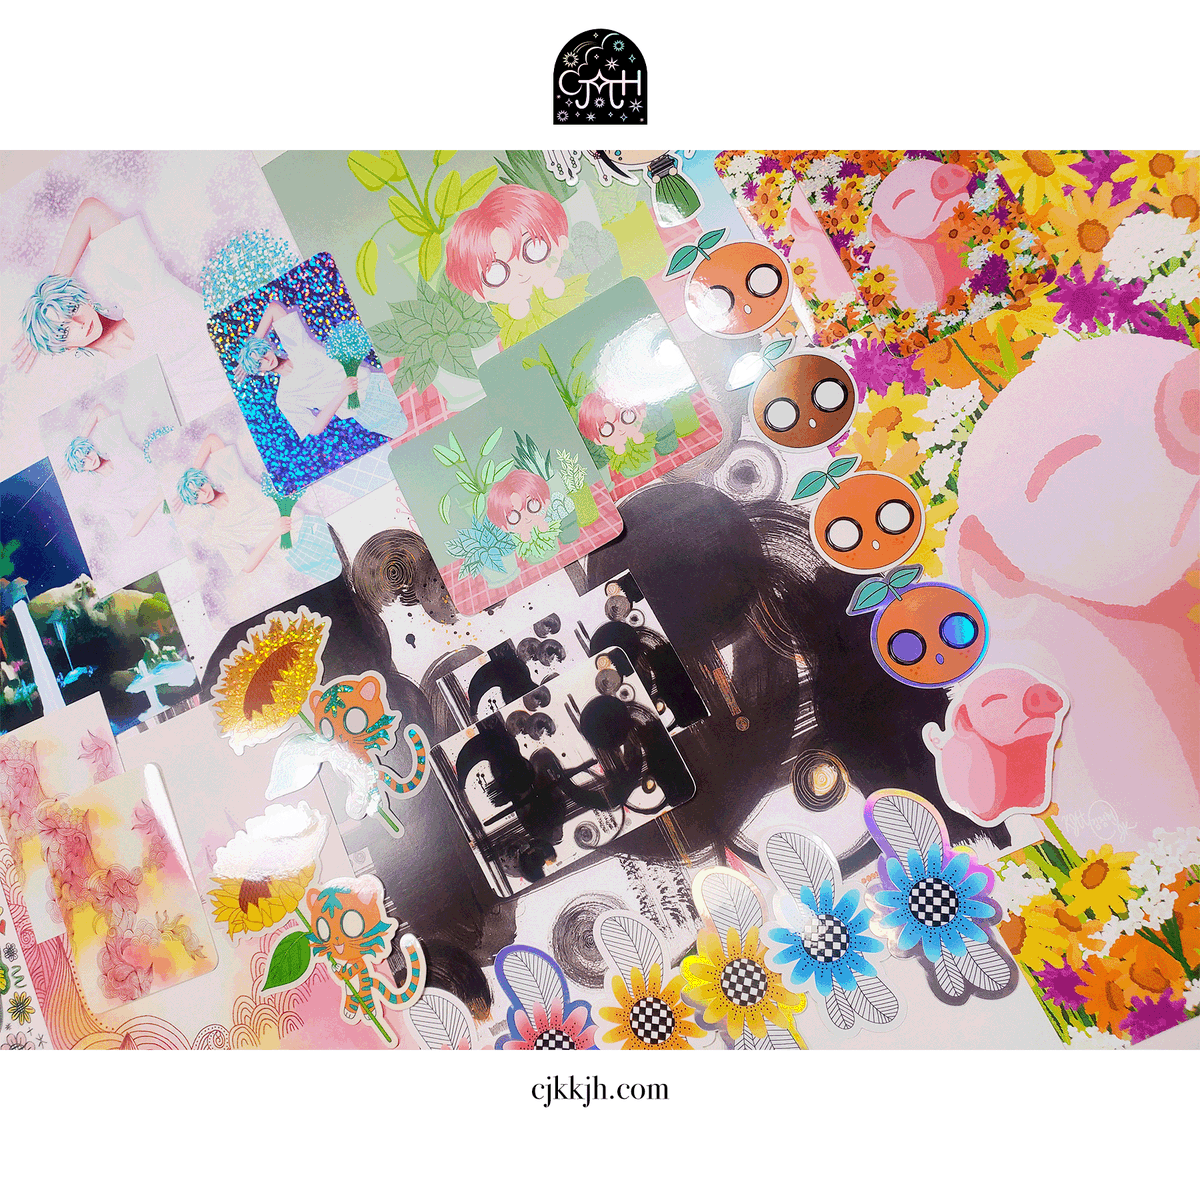 Which art is your favorite? Let me know! <33 You can get all of these on my website! Your support will be eternally appreciated. 💌

Shop 🔗: cjkkjh.com/home

#cjkkjh #cjkkjhart #selfemployeed #cute #stickershop #artprints #kawaii #colorfulart #smallbusiness #stationery